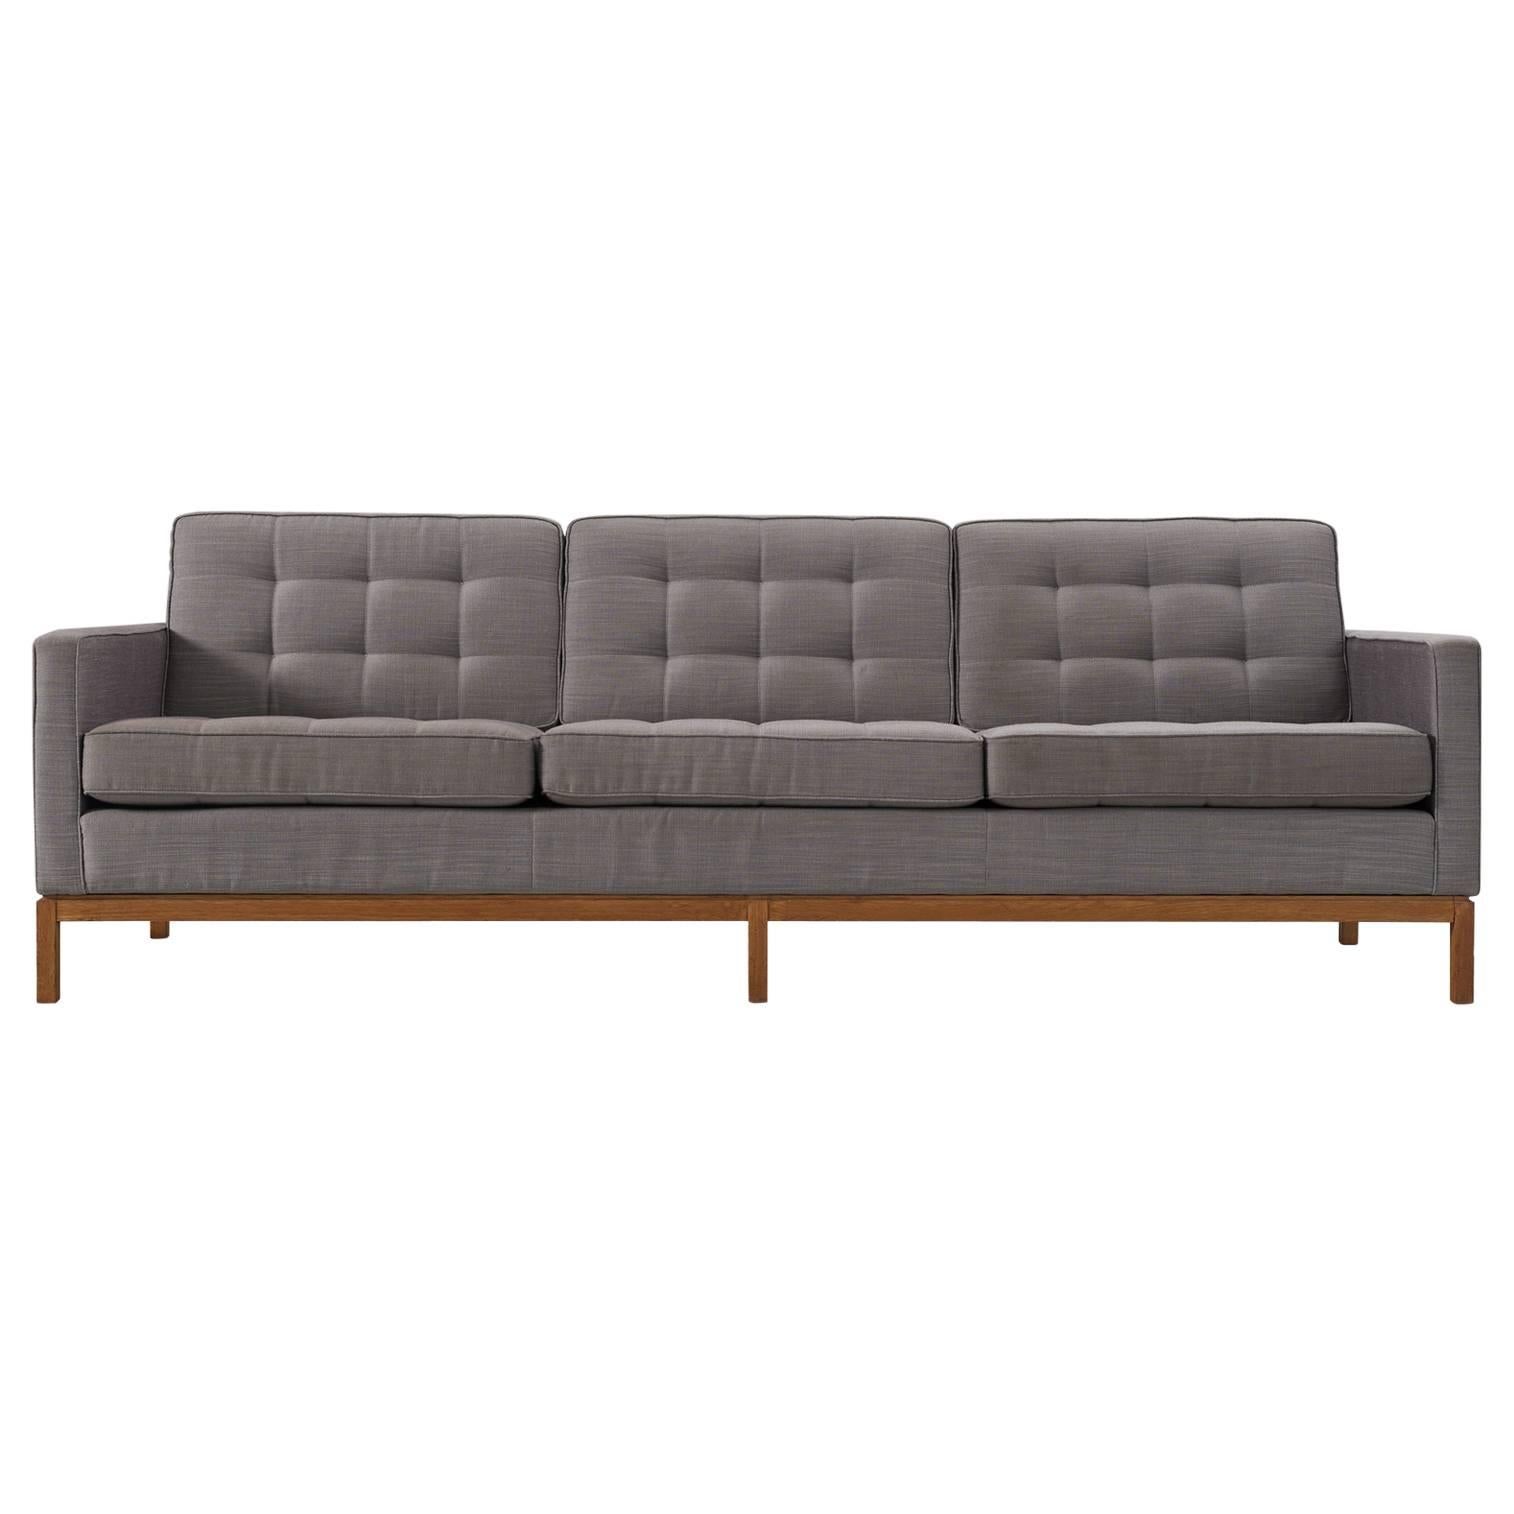 Florence Knoll Three-Seat Sofa with Wooden Base and Fabric Upholstery